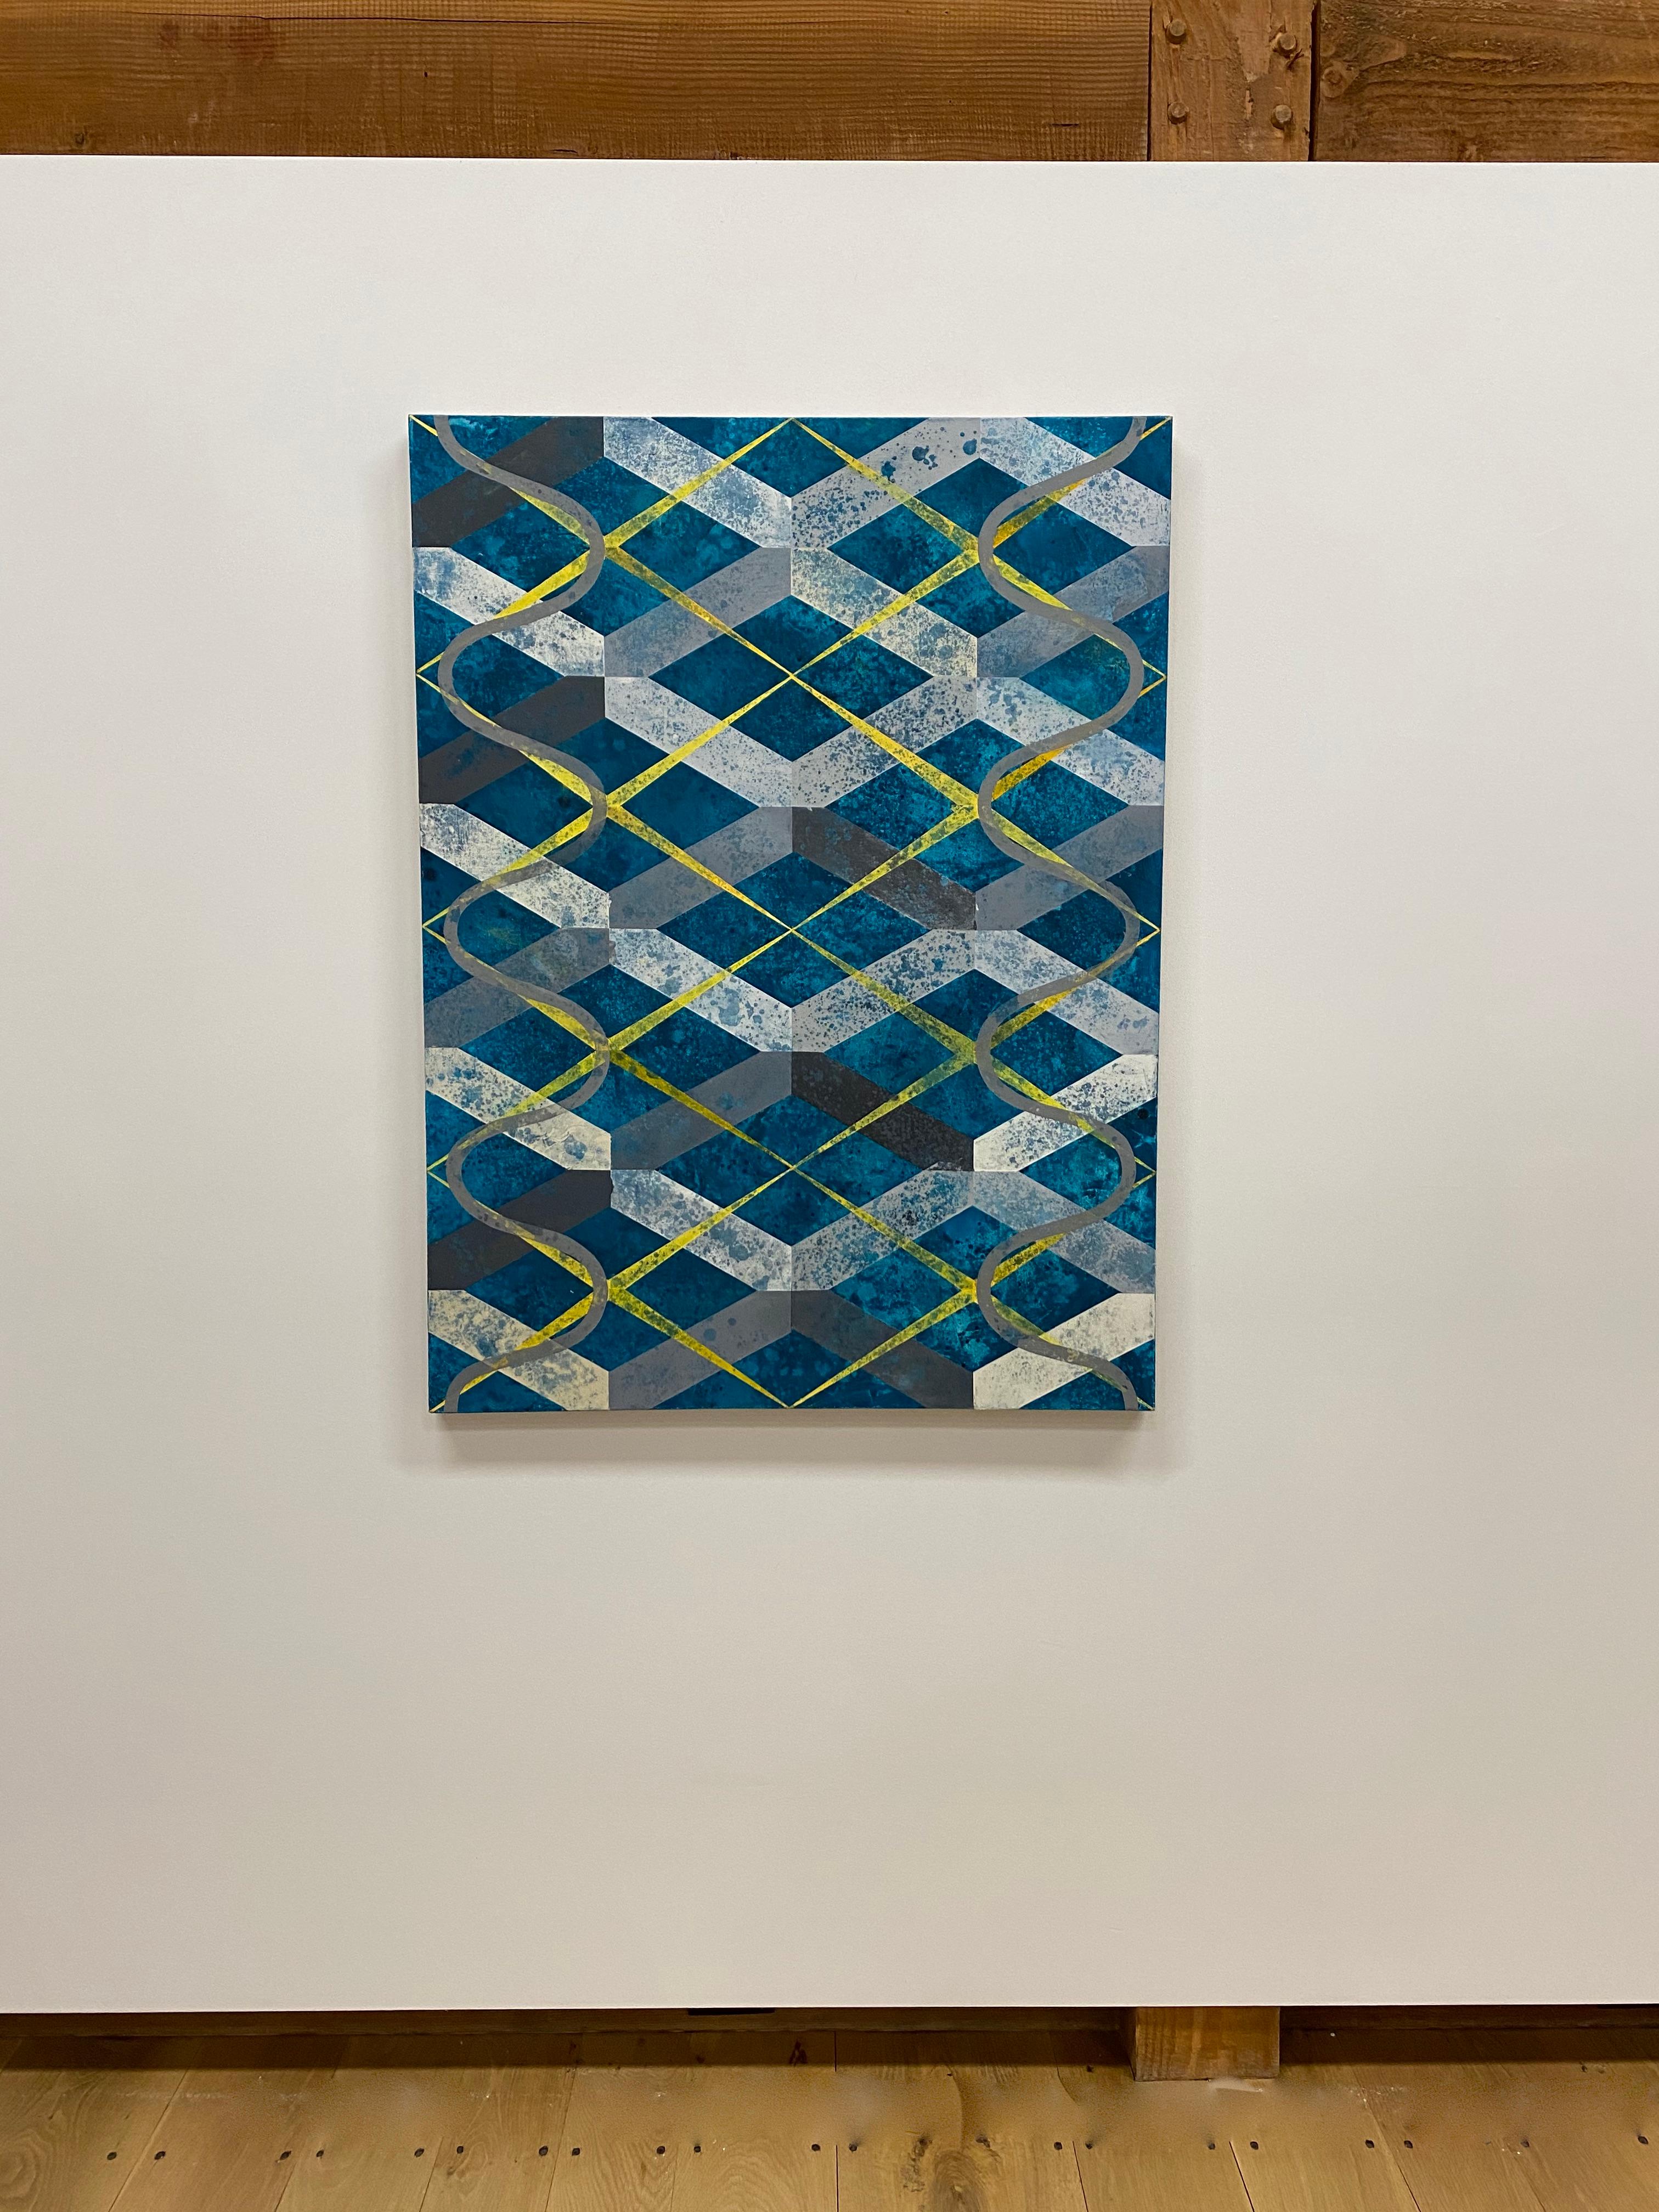 Dream of a River to the Sea, Turquoise Blue, Yellow Geometric Abstract Pattern - Painting by Mary Judge